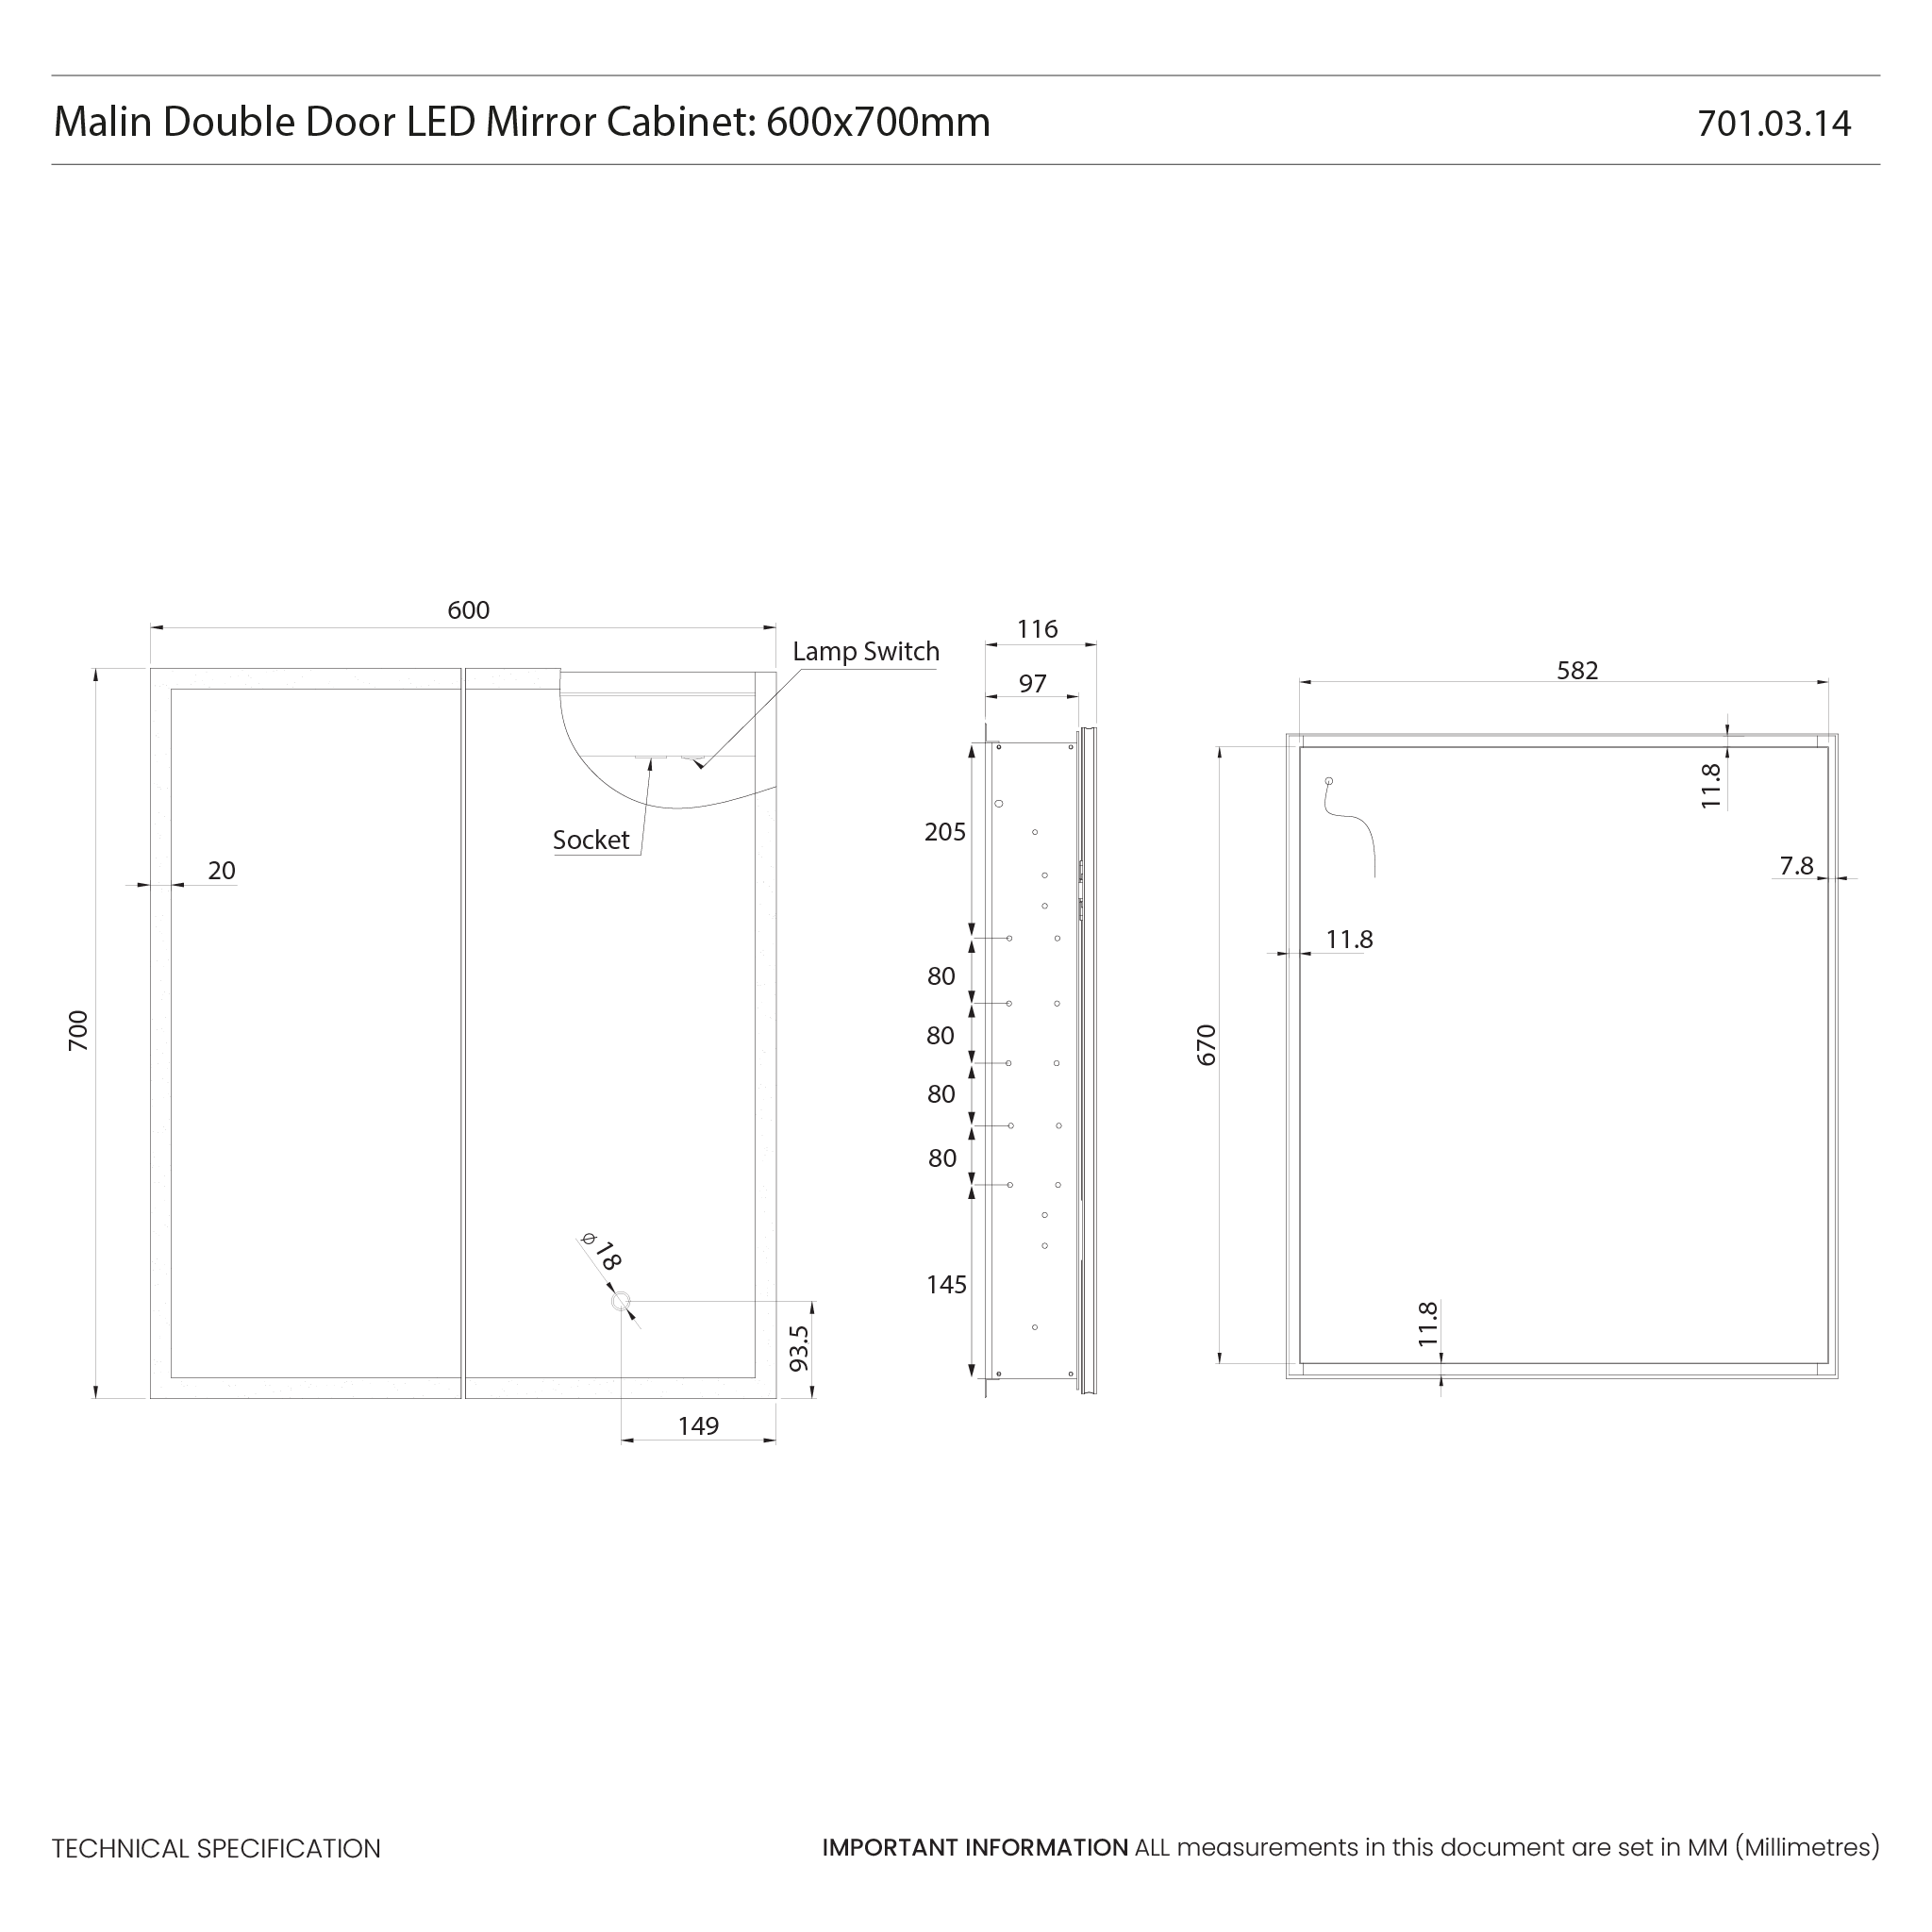 Malin Double Door 600x700mm Recessed LED Cabinet